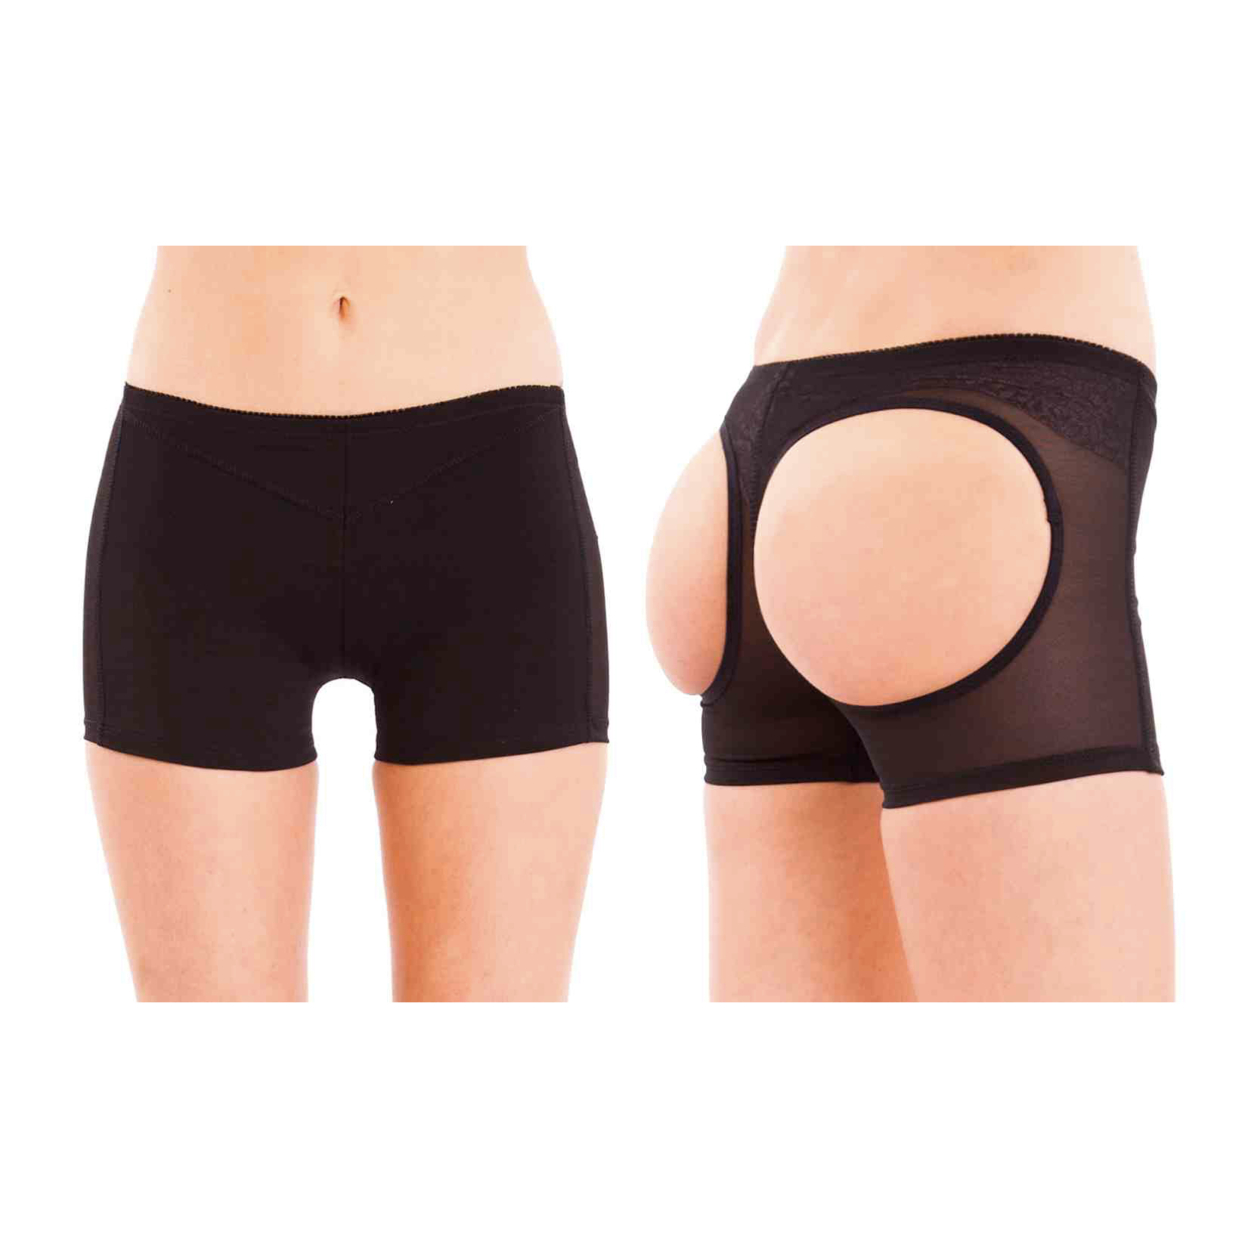 Women's Butt-Lifting And Tummy-Control Brief - Black, S